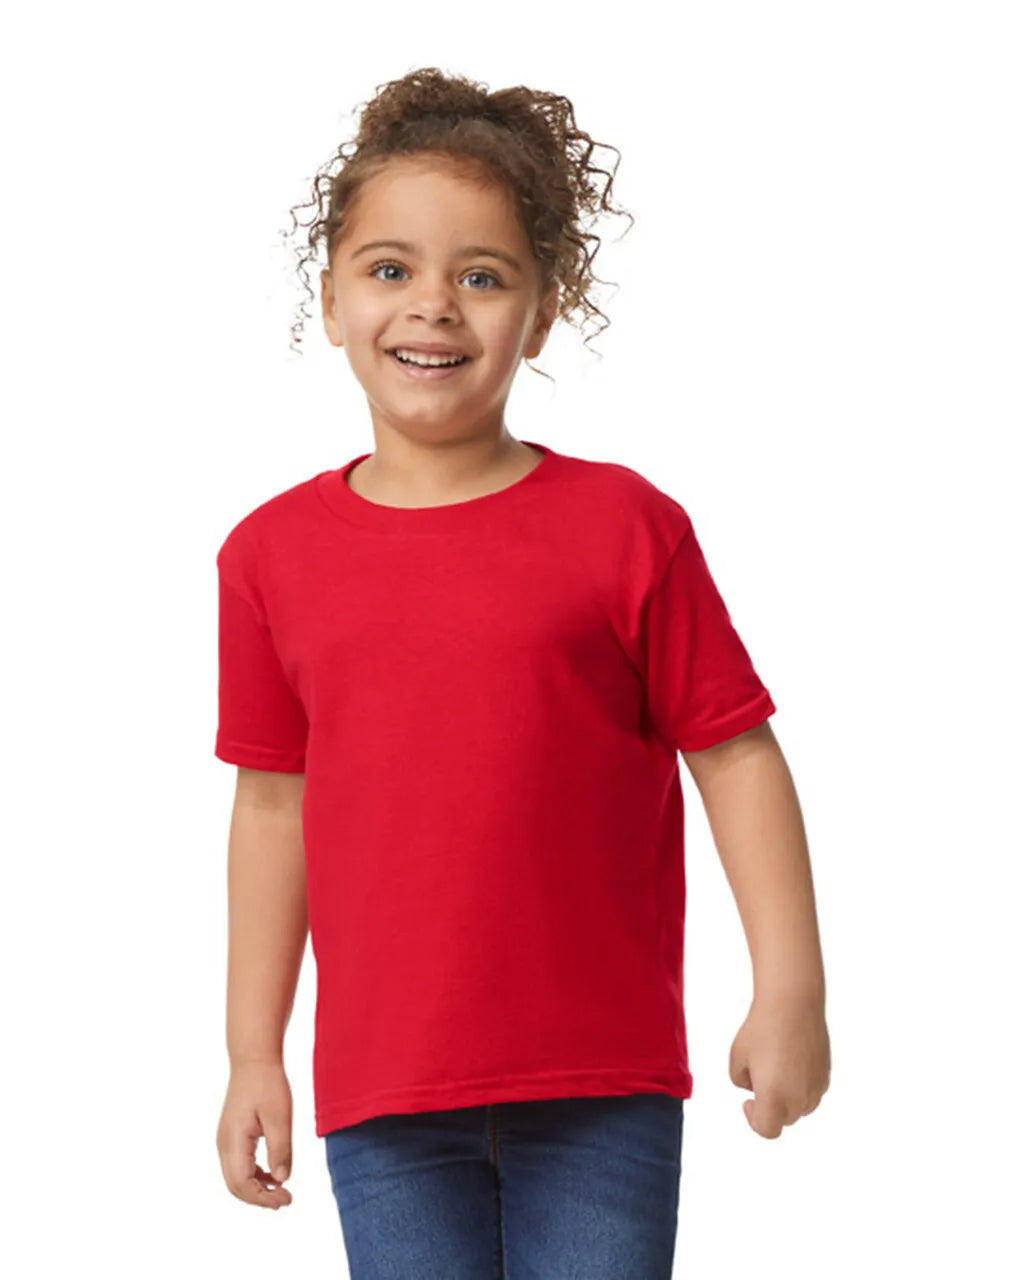 Toddlers Tshirt - Red